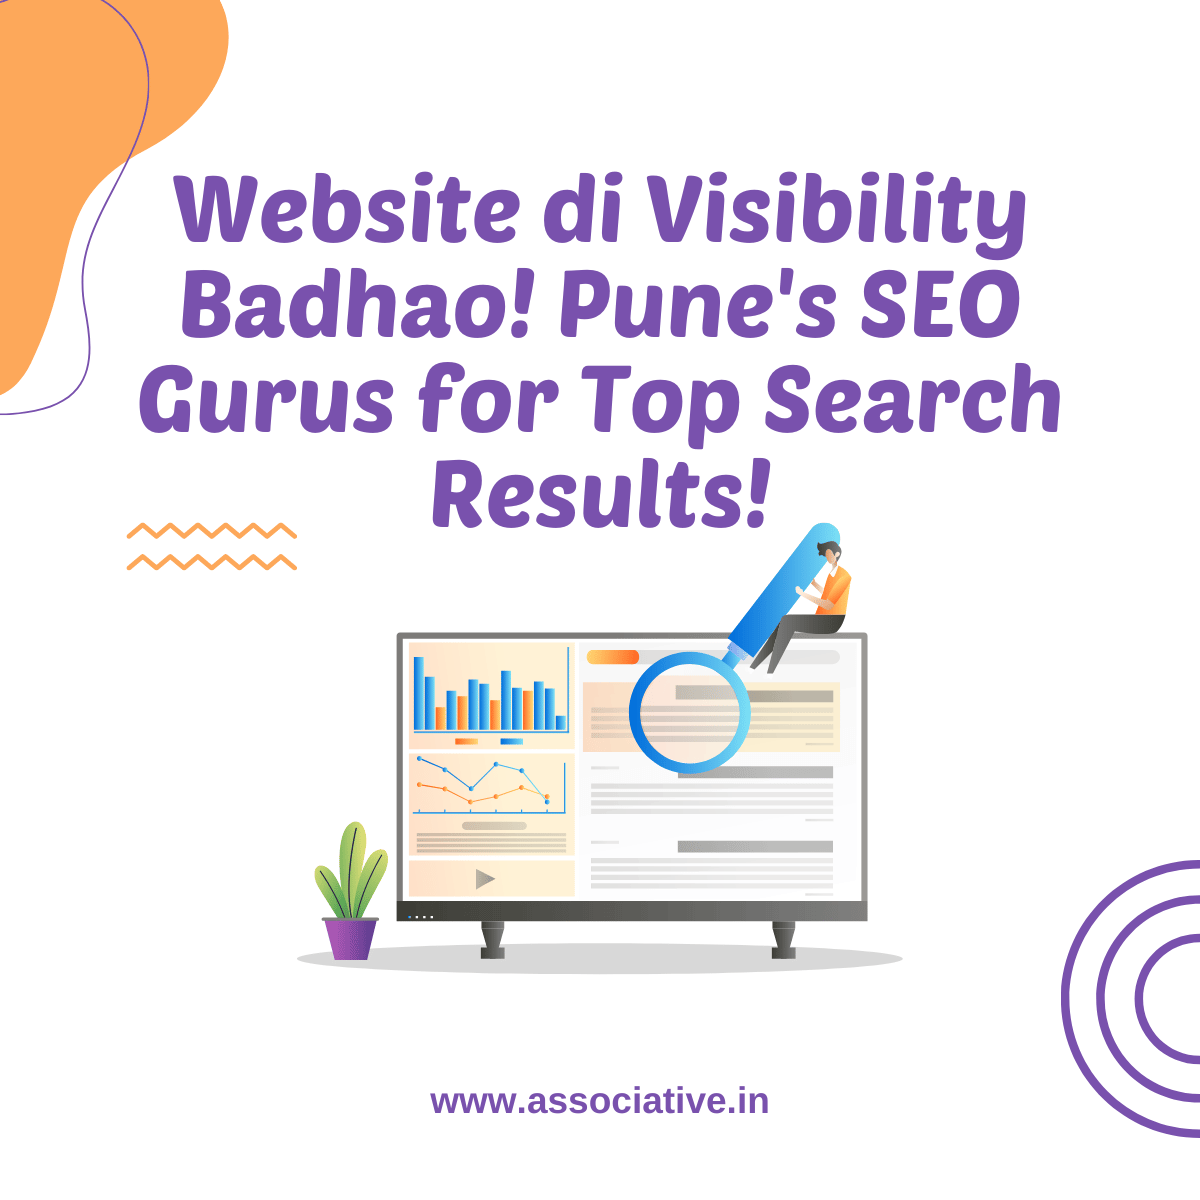 Website di Visibility Badhao! Pune's SEO Gurus for Top Search Results!